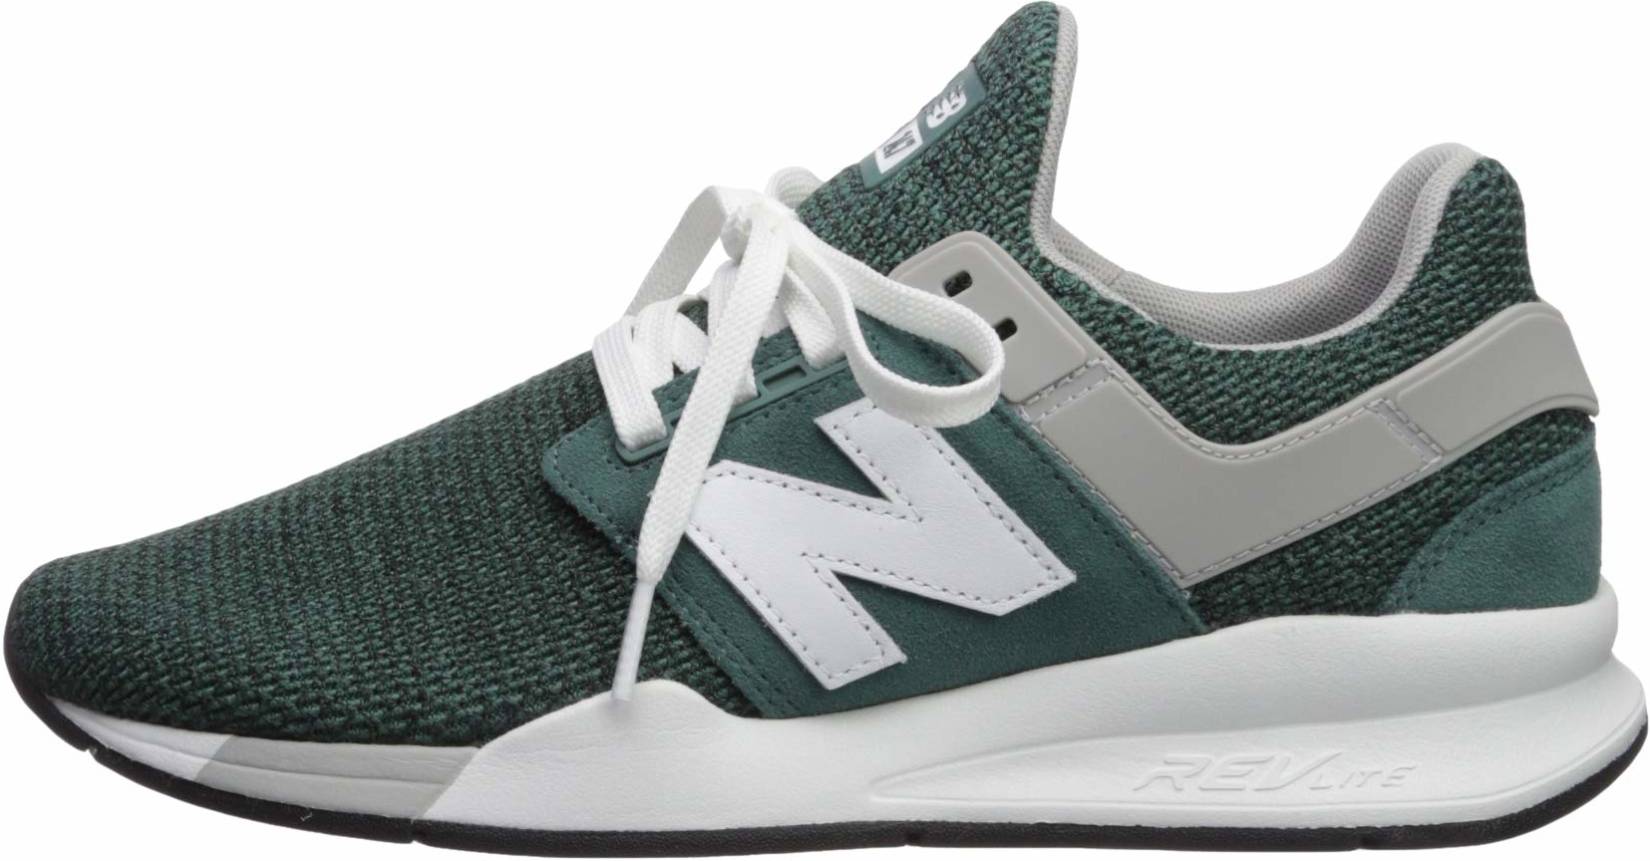 grill slave message New Balance 247 v2 sneakers in 20+ colors (only $41) | RunRepeat